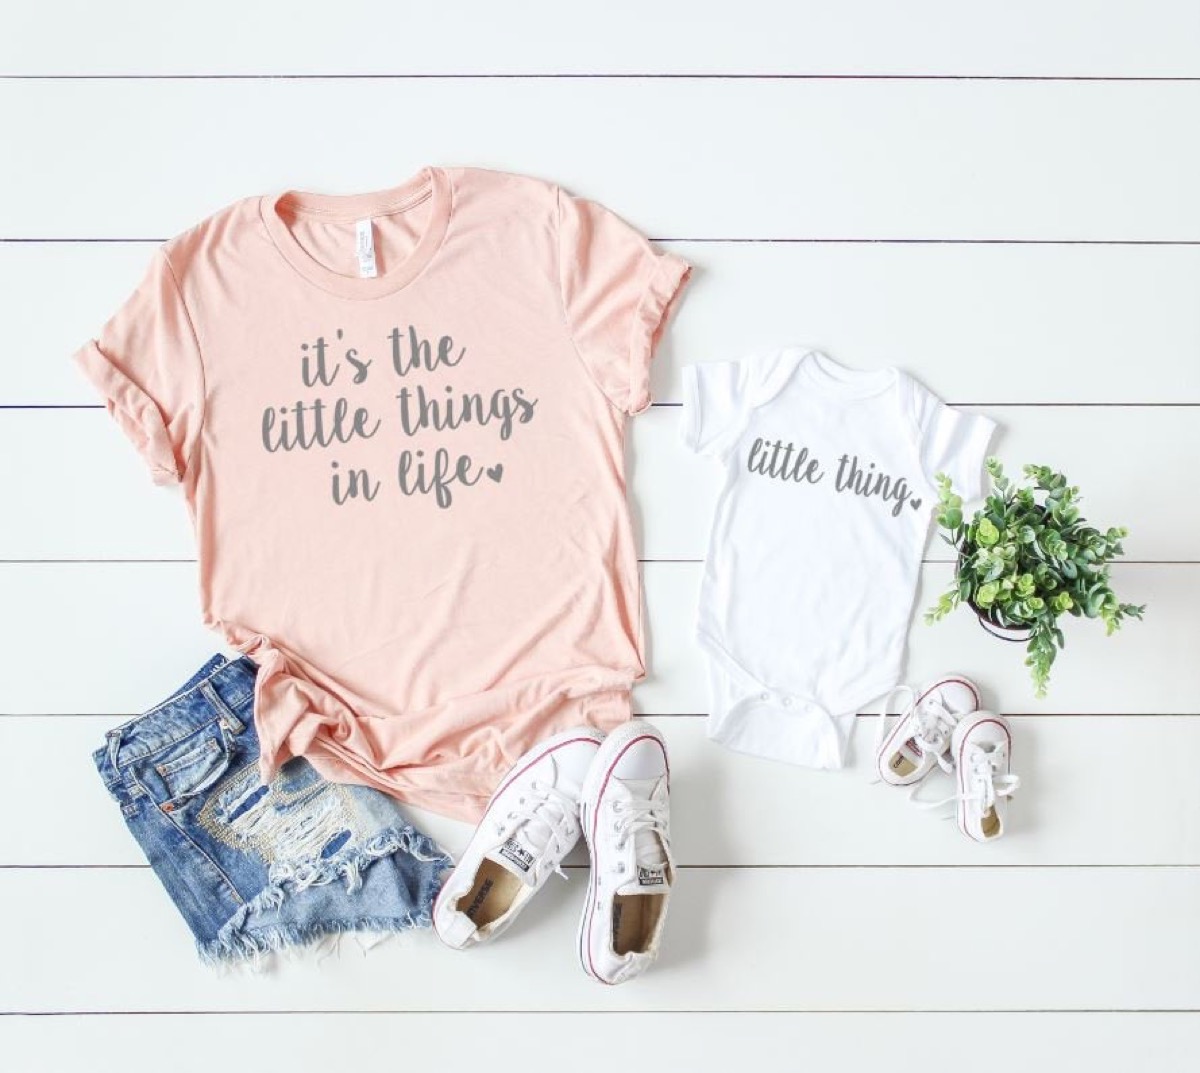 pink shirt with "it's the little things in life" and baby onesie with "little thing" on it, mother daughter gifts